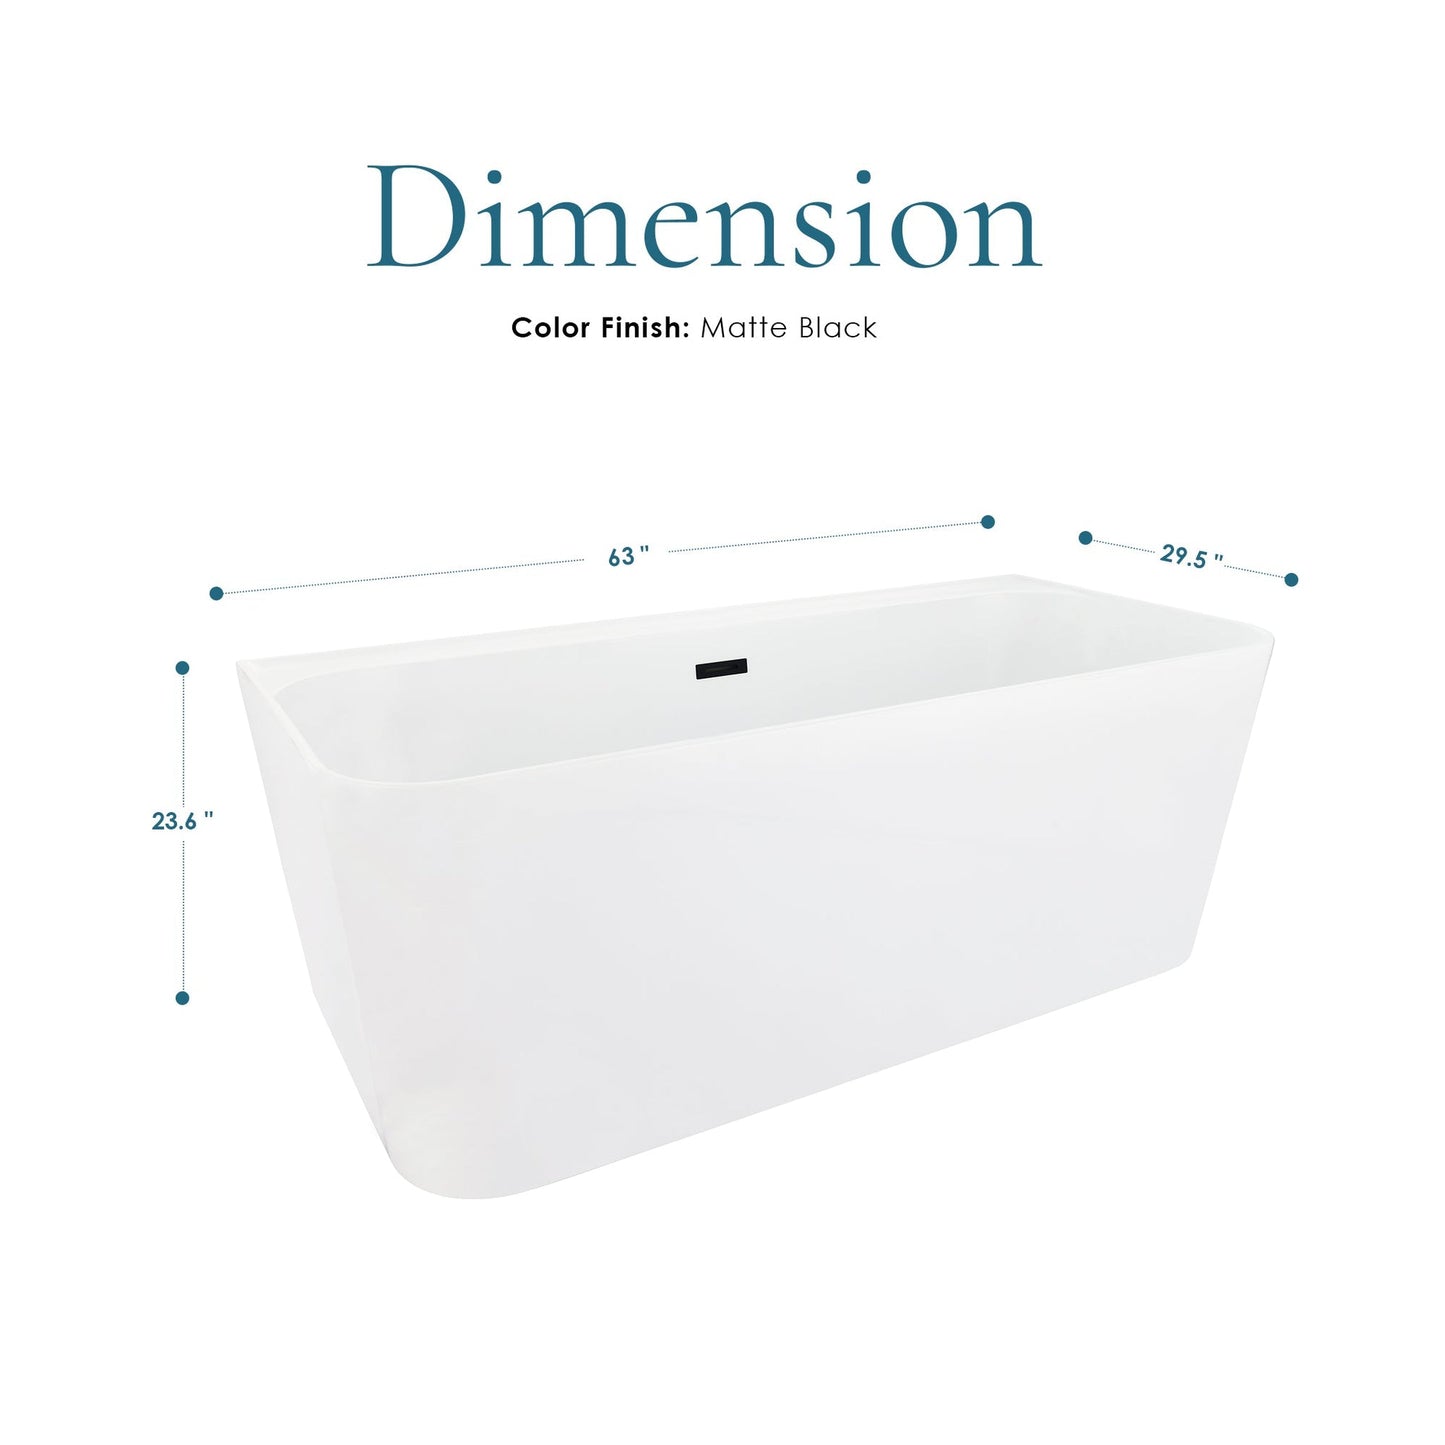 Altair Groda 63" x 30" White Acrylic Freestanding Bathtub With Matte Black Drain and Overflow